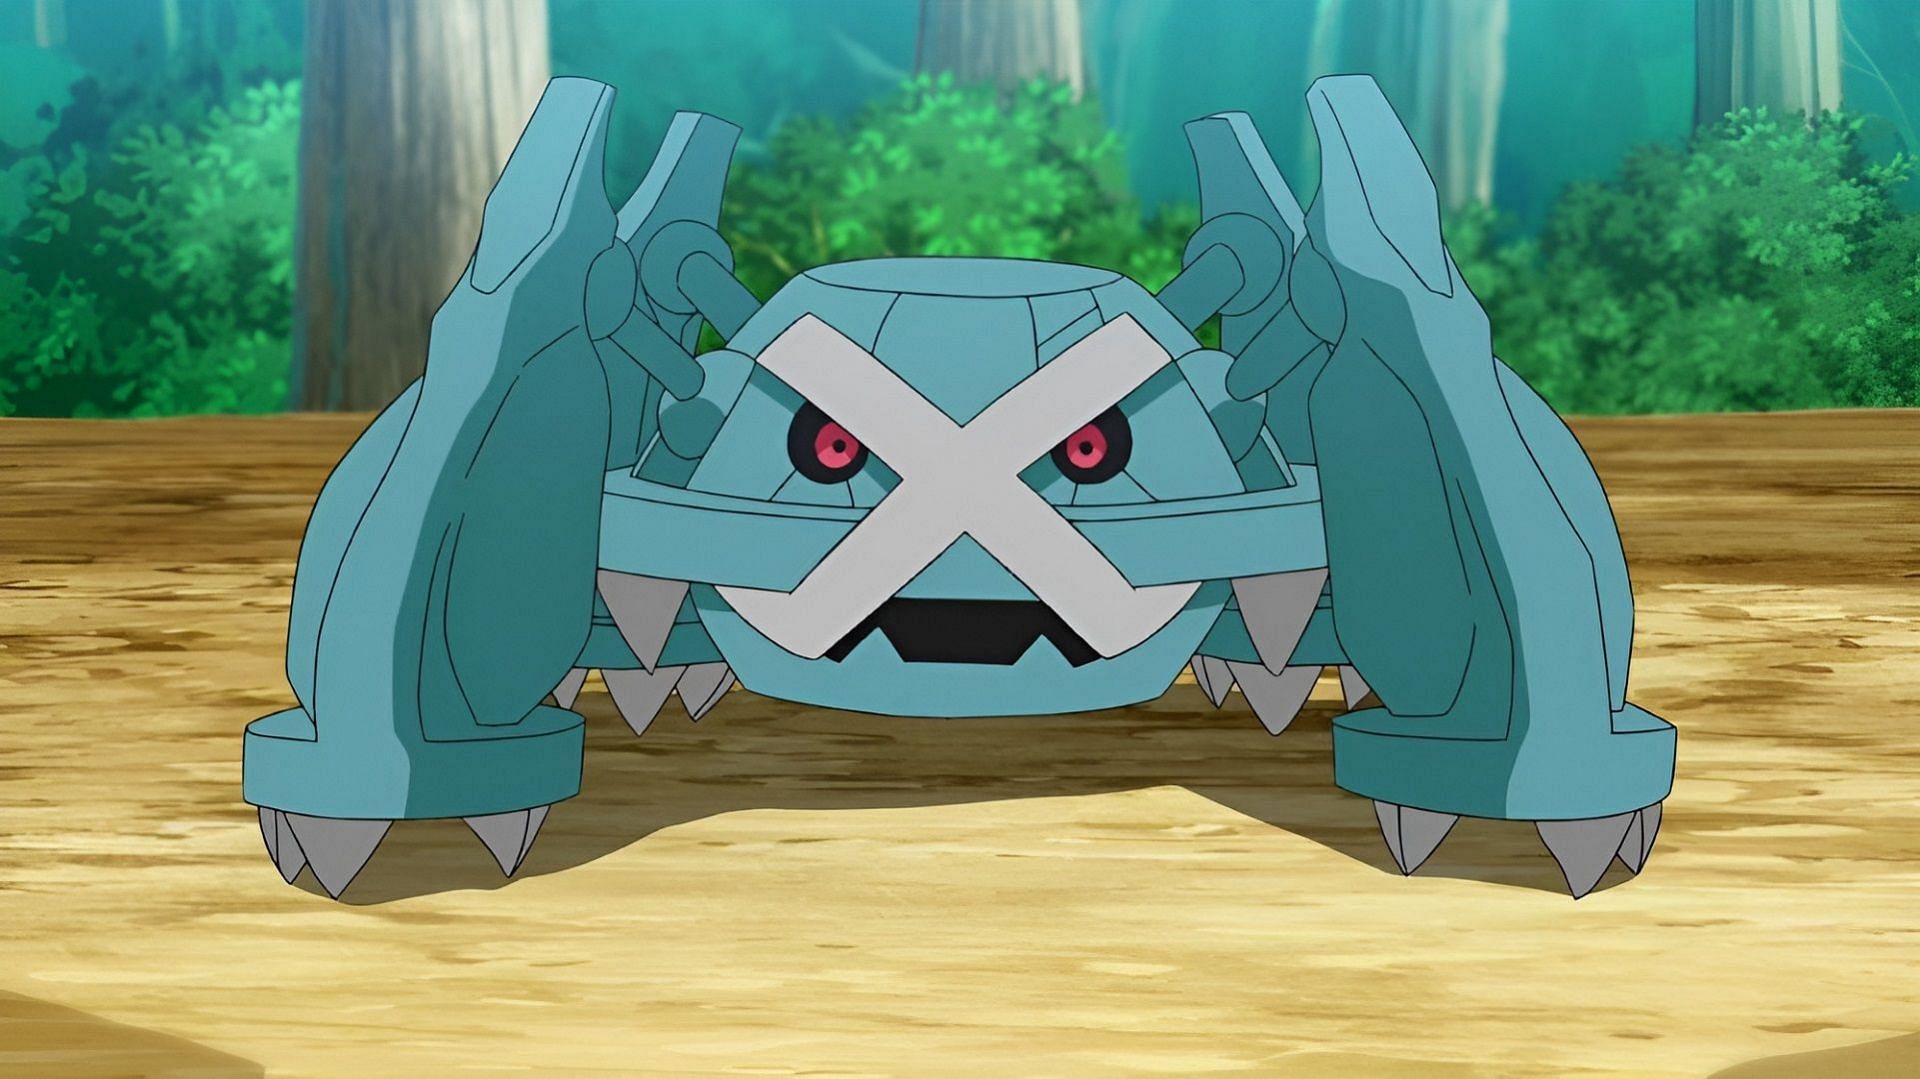 A partial Steel-type like Metagross can counter Enamorus well in Pokemon GO (Image via The Pokemon Company)